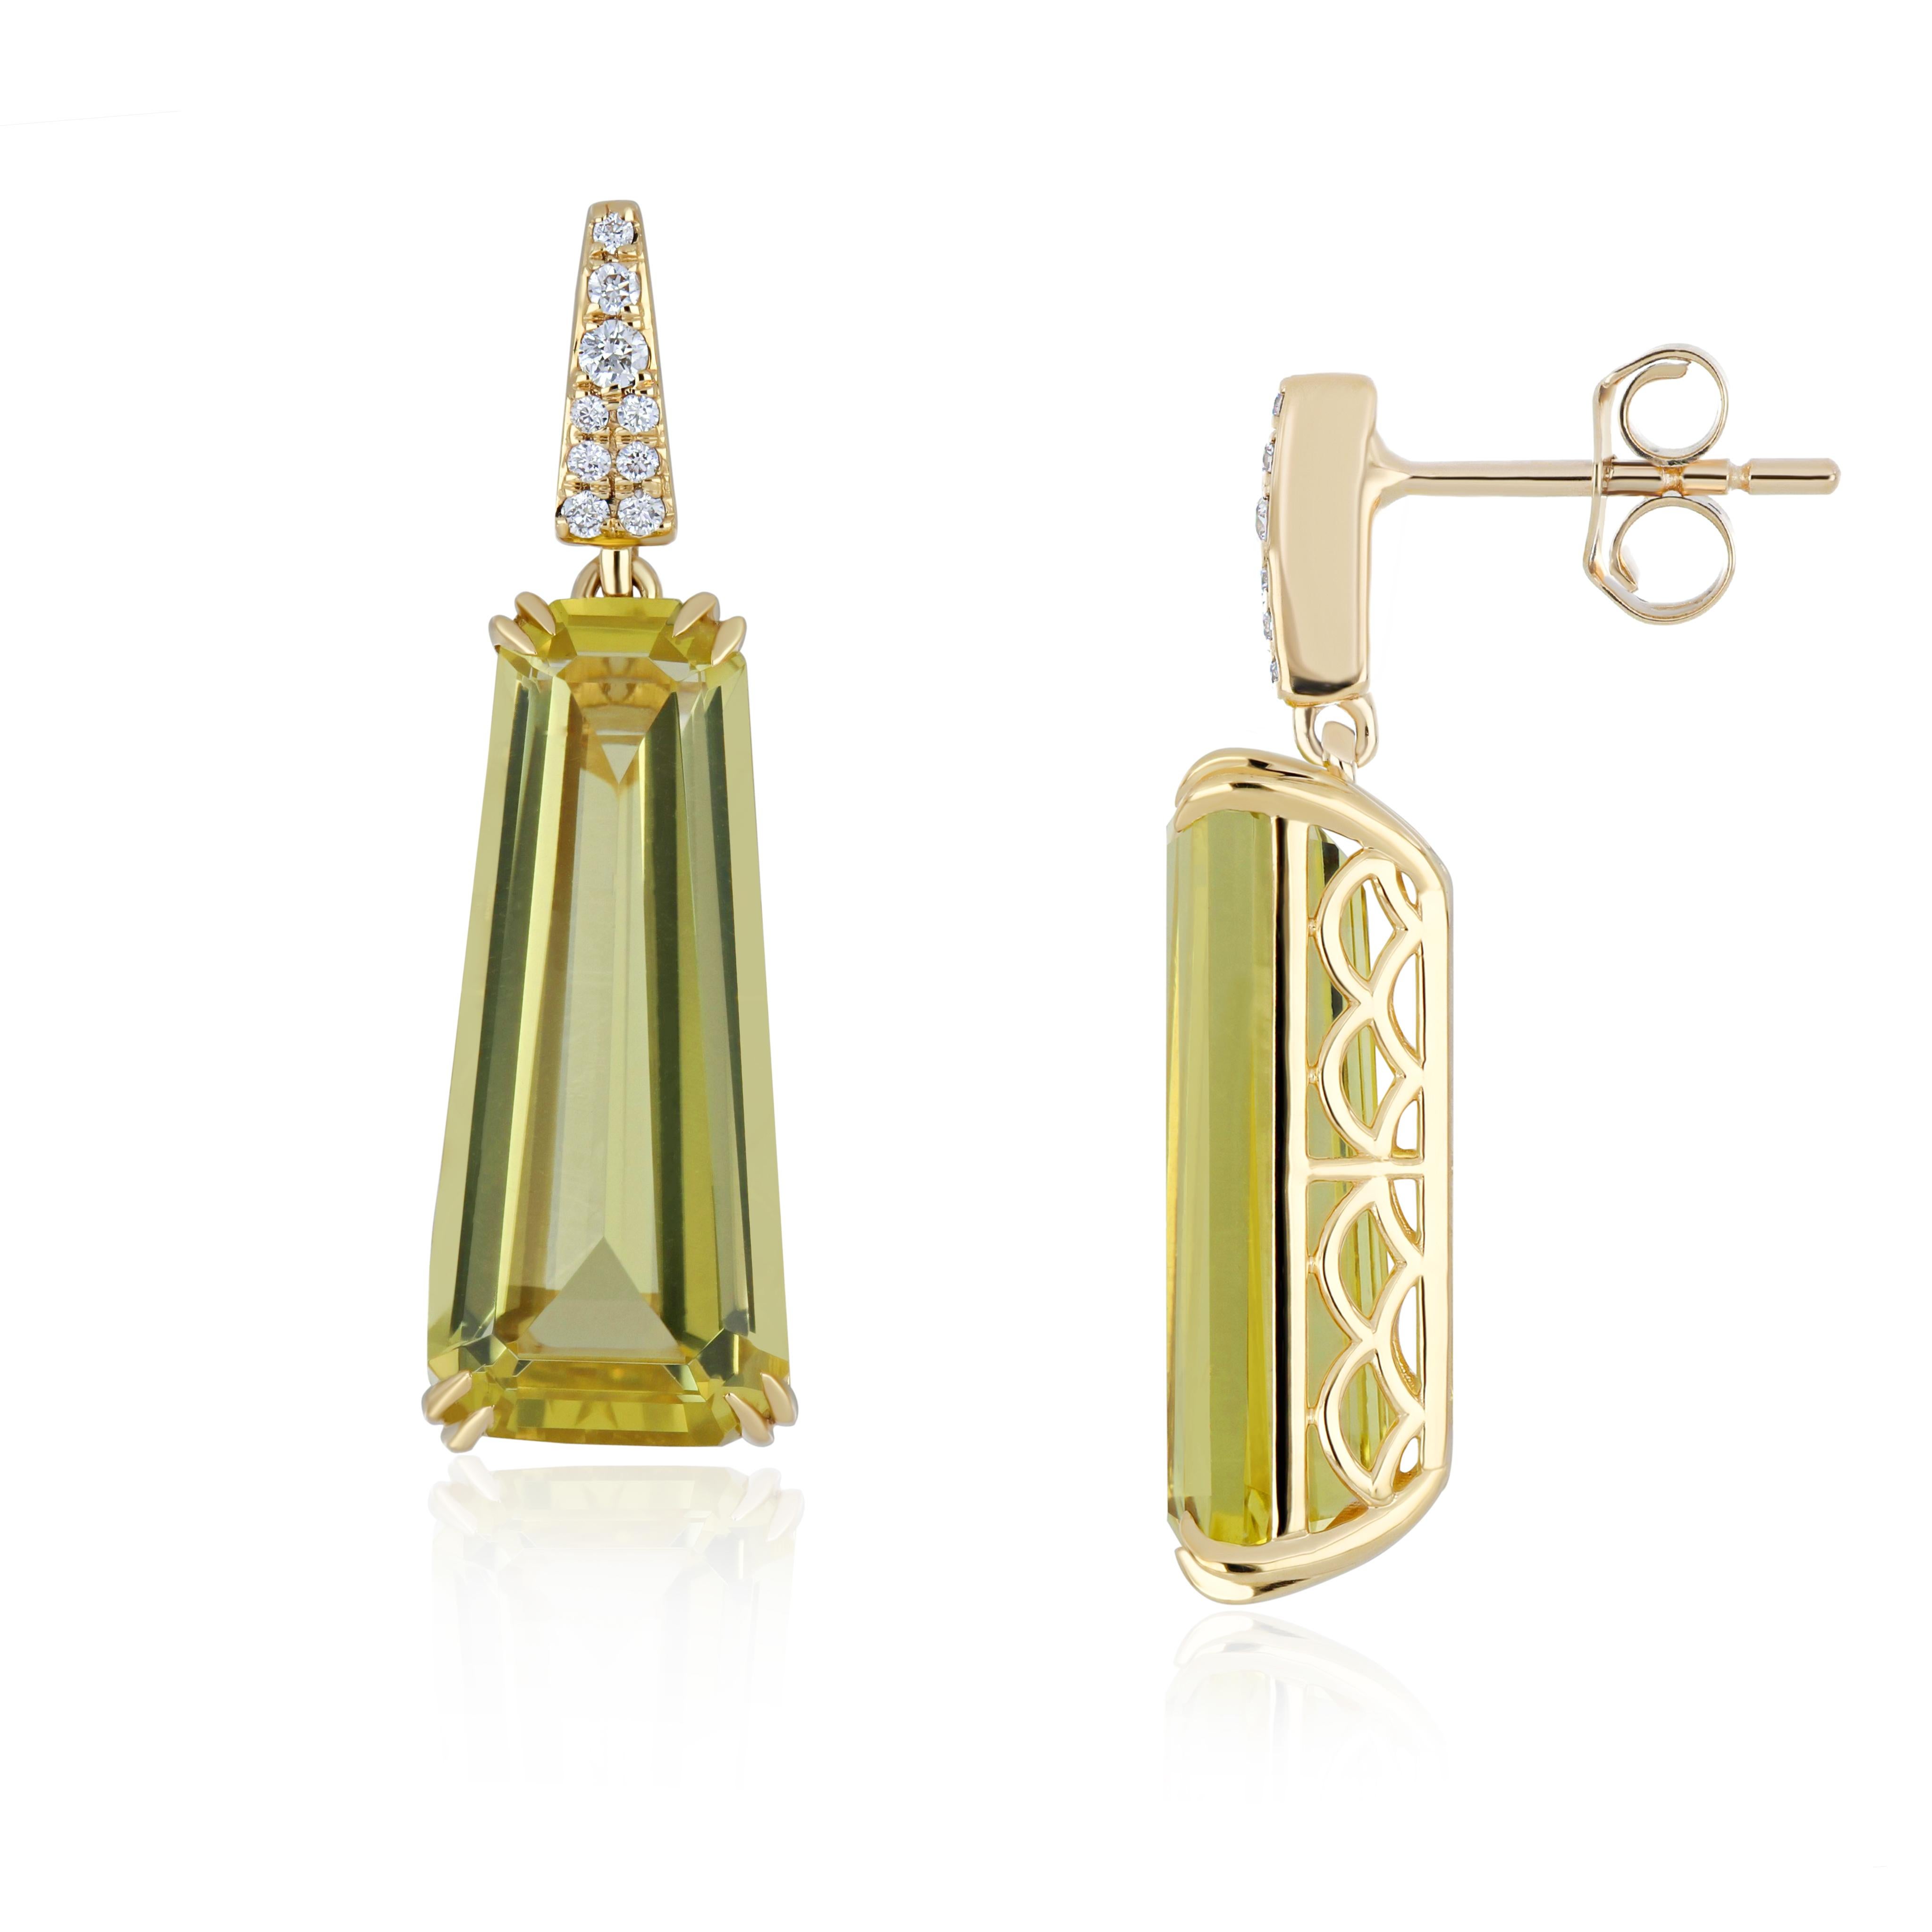 Indulge in Opulence: Magnificently Crafted 18 Karat Yellow Gold Earrings, Adorned with a Resplendent 10.0 Cts (approx.) Fancy-Cut Lemon Quartz at the Heart, Complemented by Micro-Pave Diamonds Weighing Approximately 0.09CTs. Each Earring a Testament